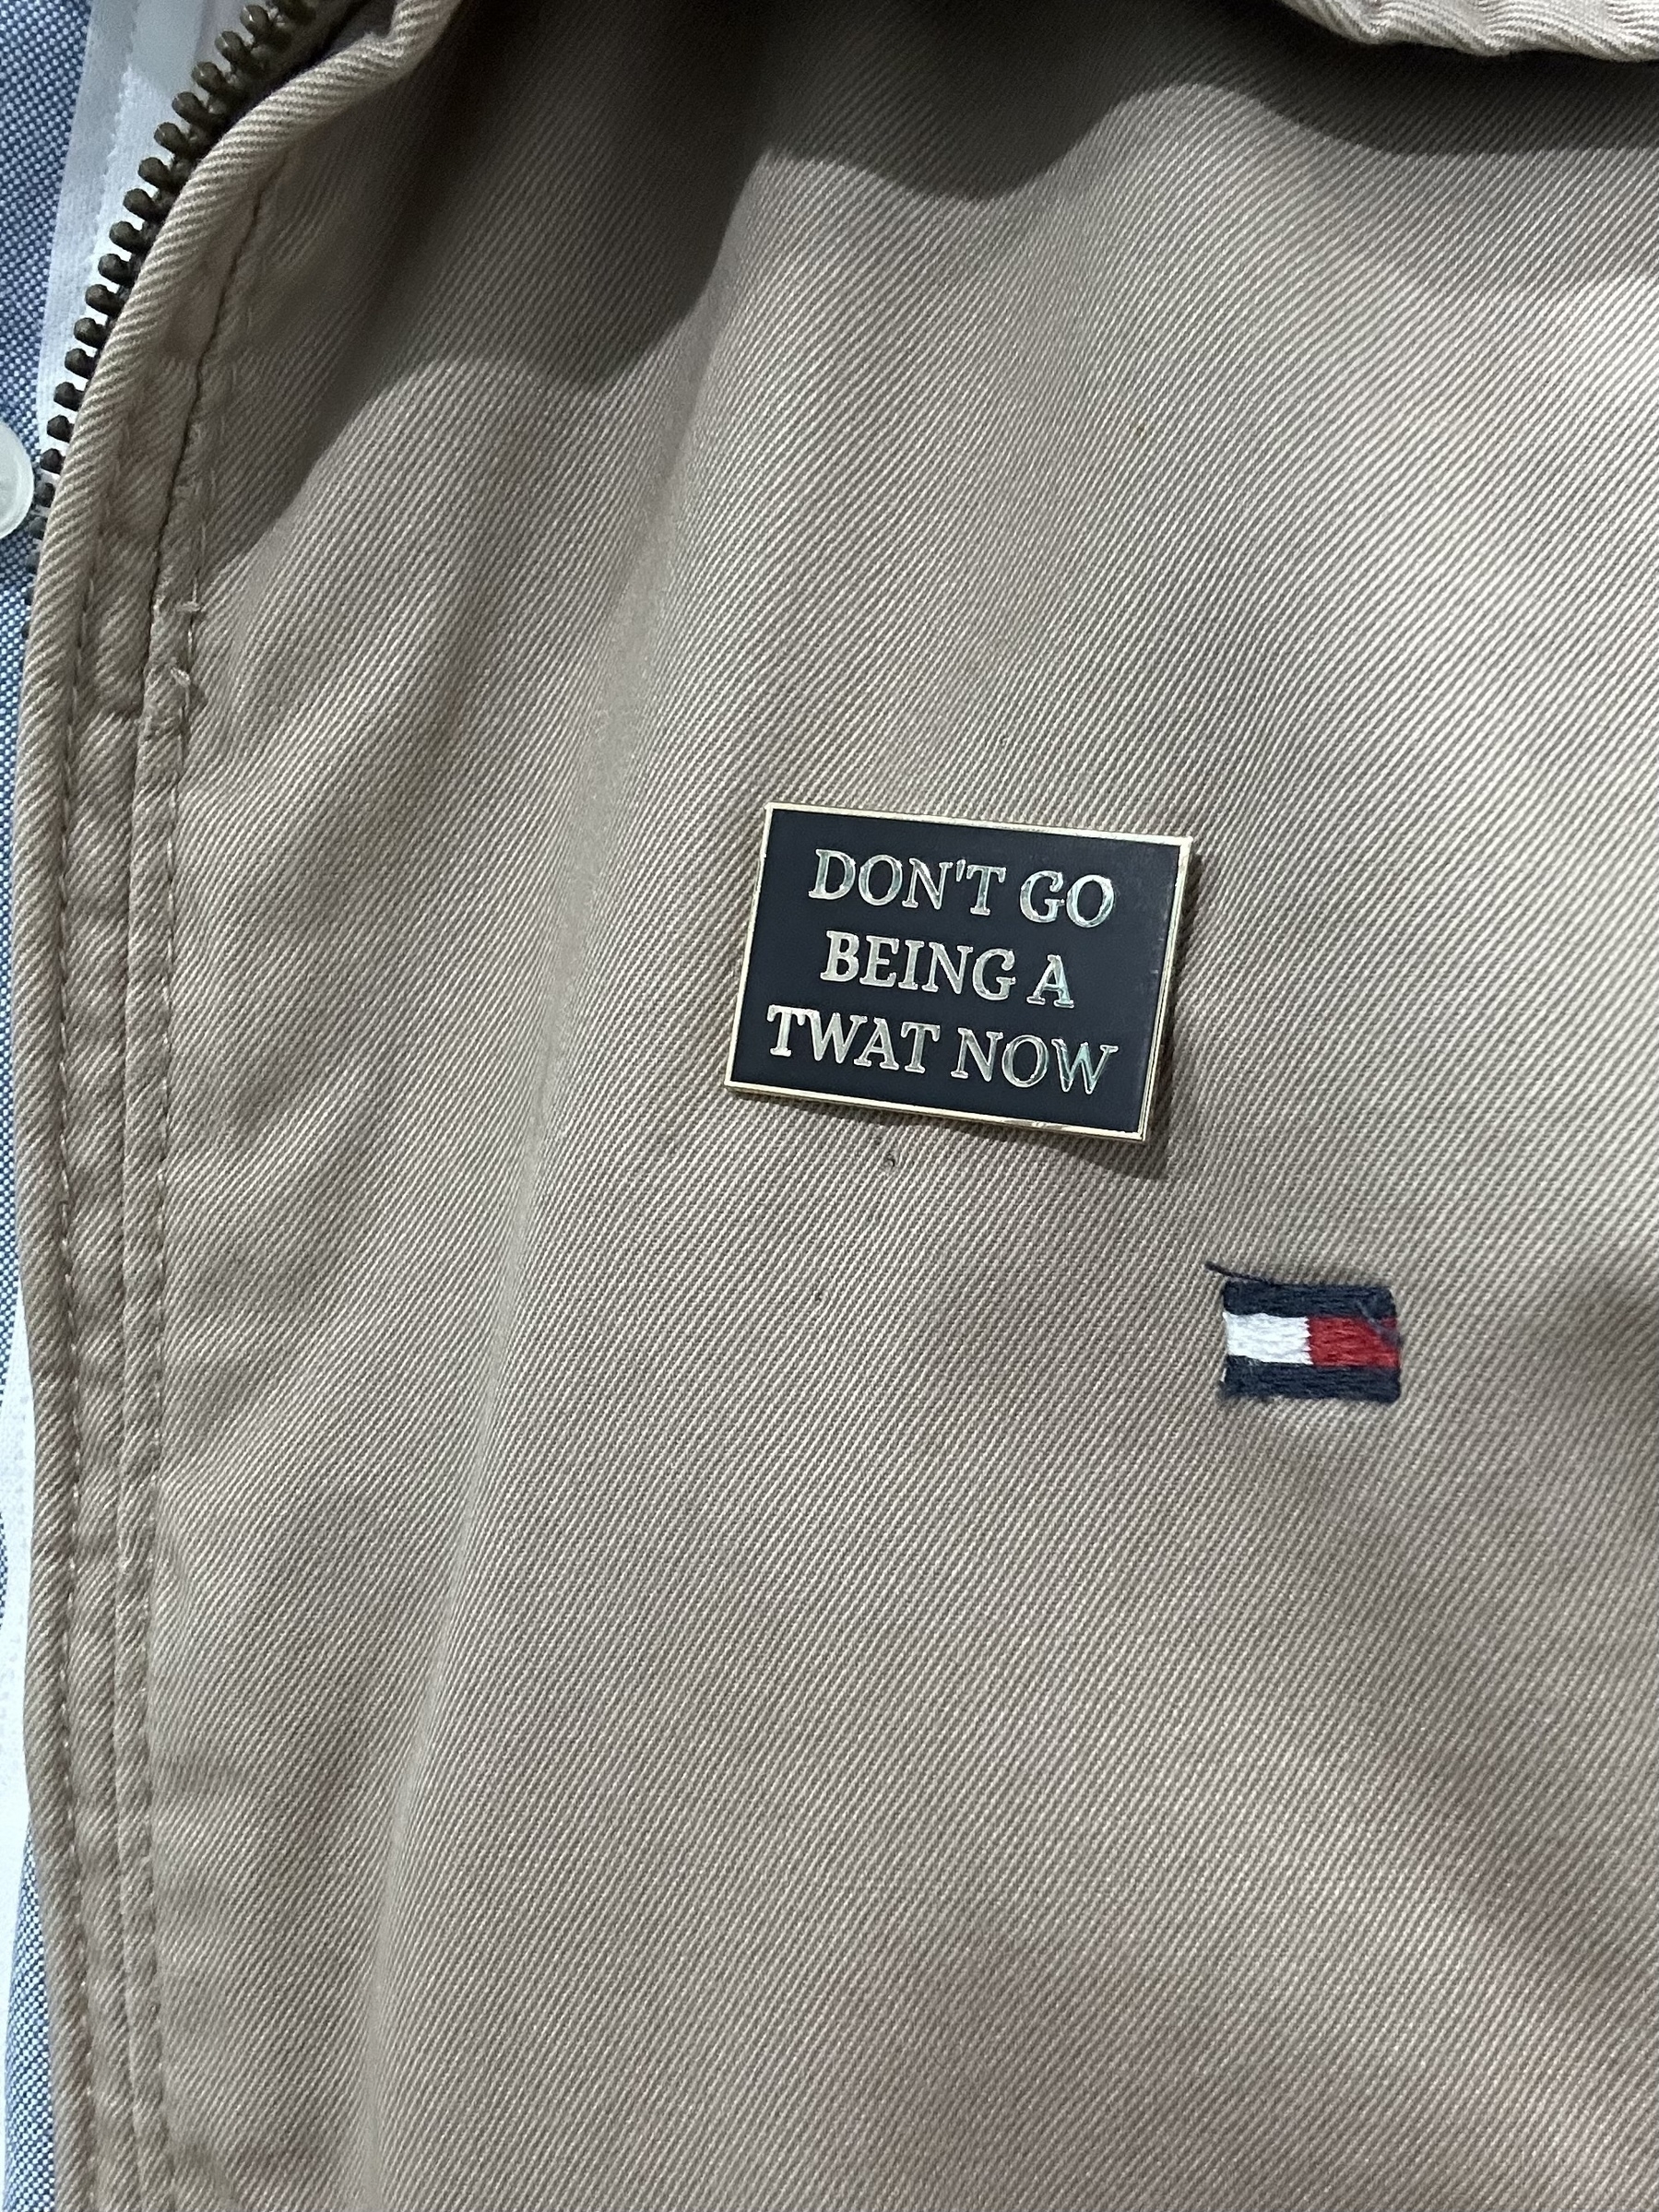 A rectangular enamel badge pinned on a cream jacket. The badge has a black background and gold lettering that says “Don’t go being a twat now”